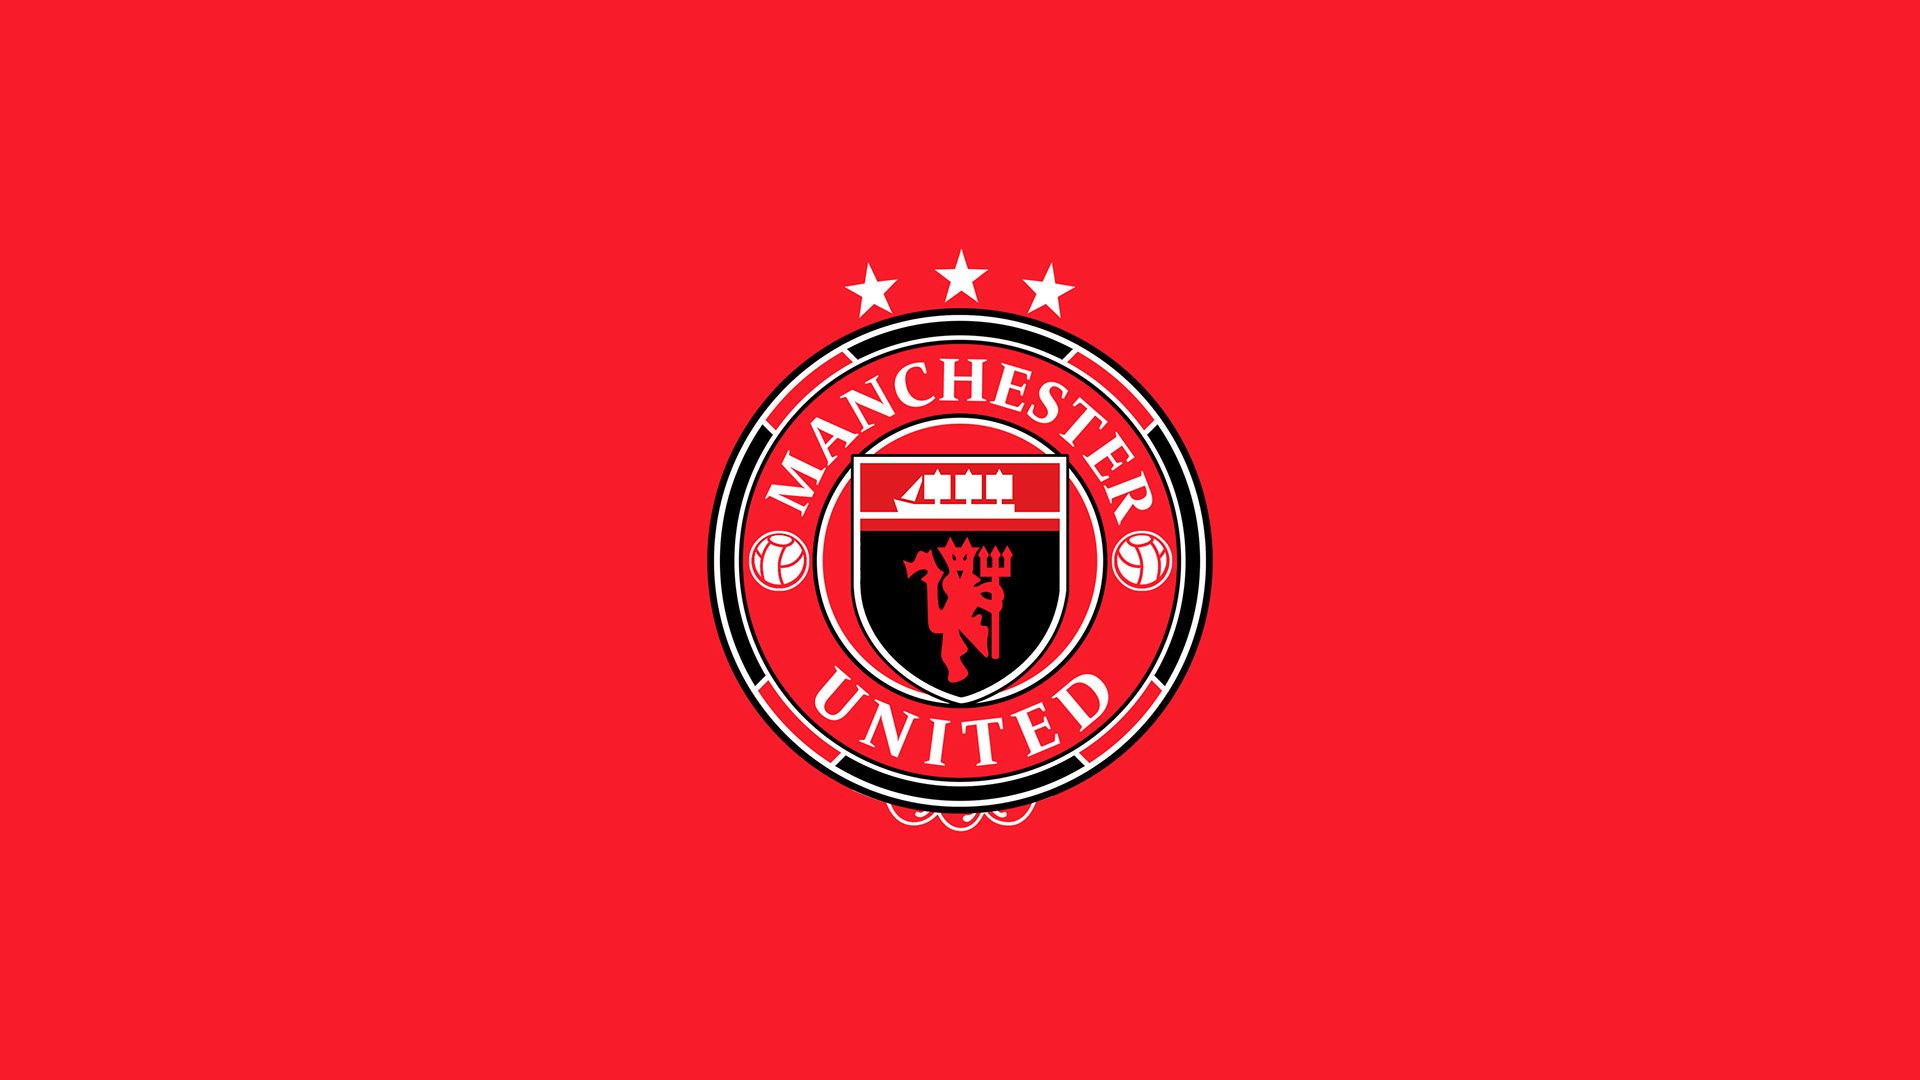 The Best News: Manchester United Logo Wallpaper 2021 United Wallpaper HD 2021 Football Wallpaper / Manchester united png image for free download